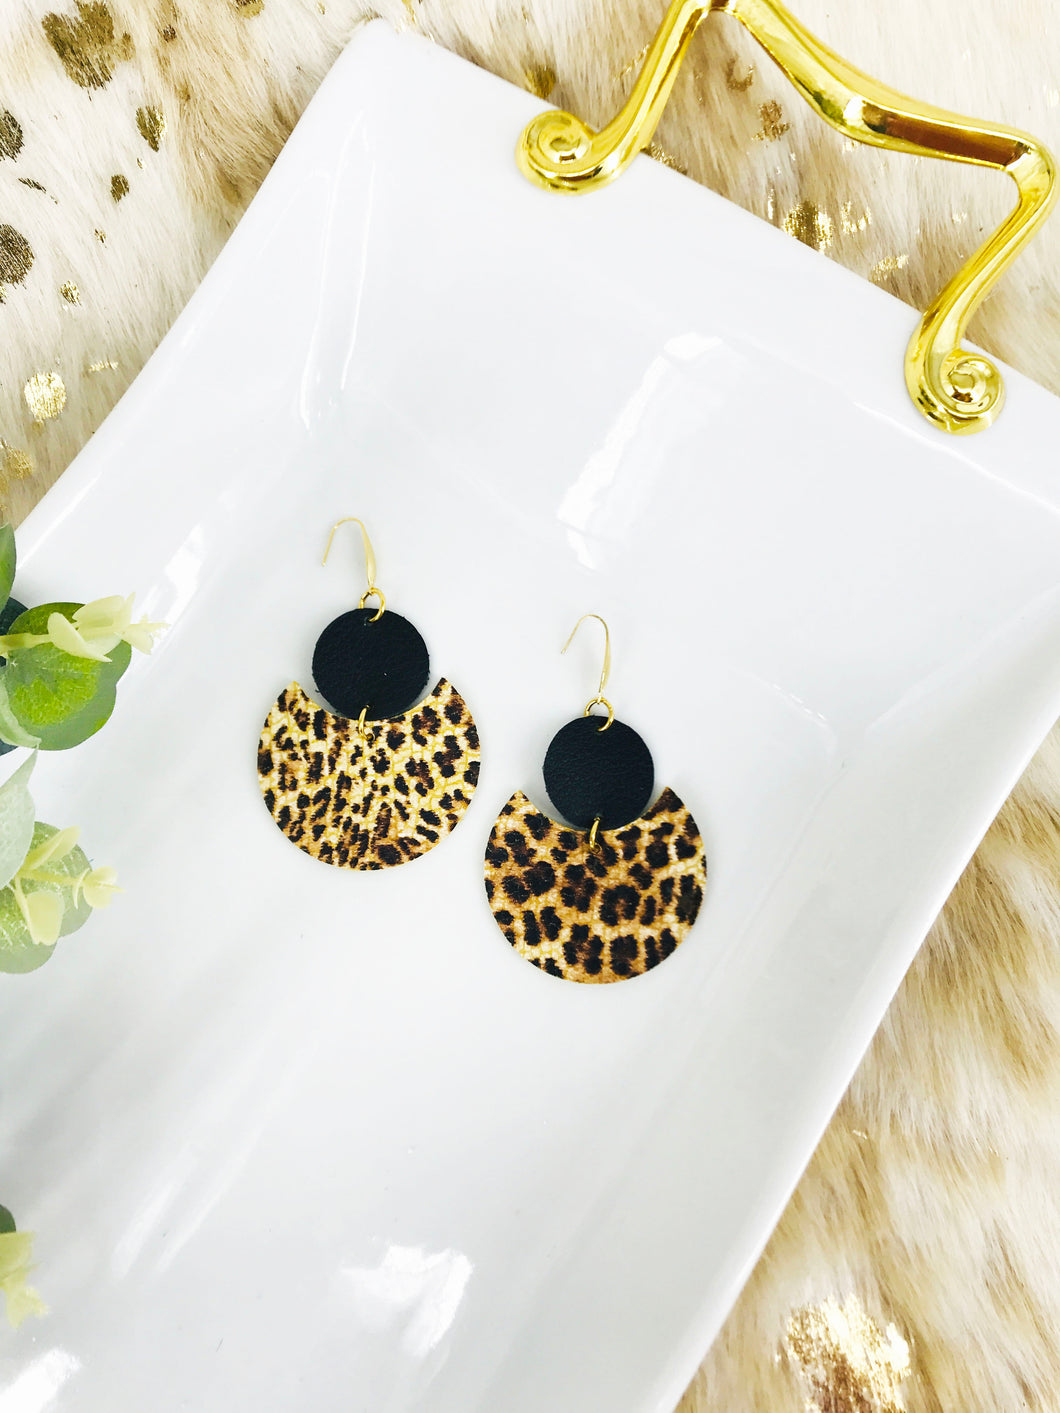 Black Leather and Leopard Leather Earrings - E19-1783